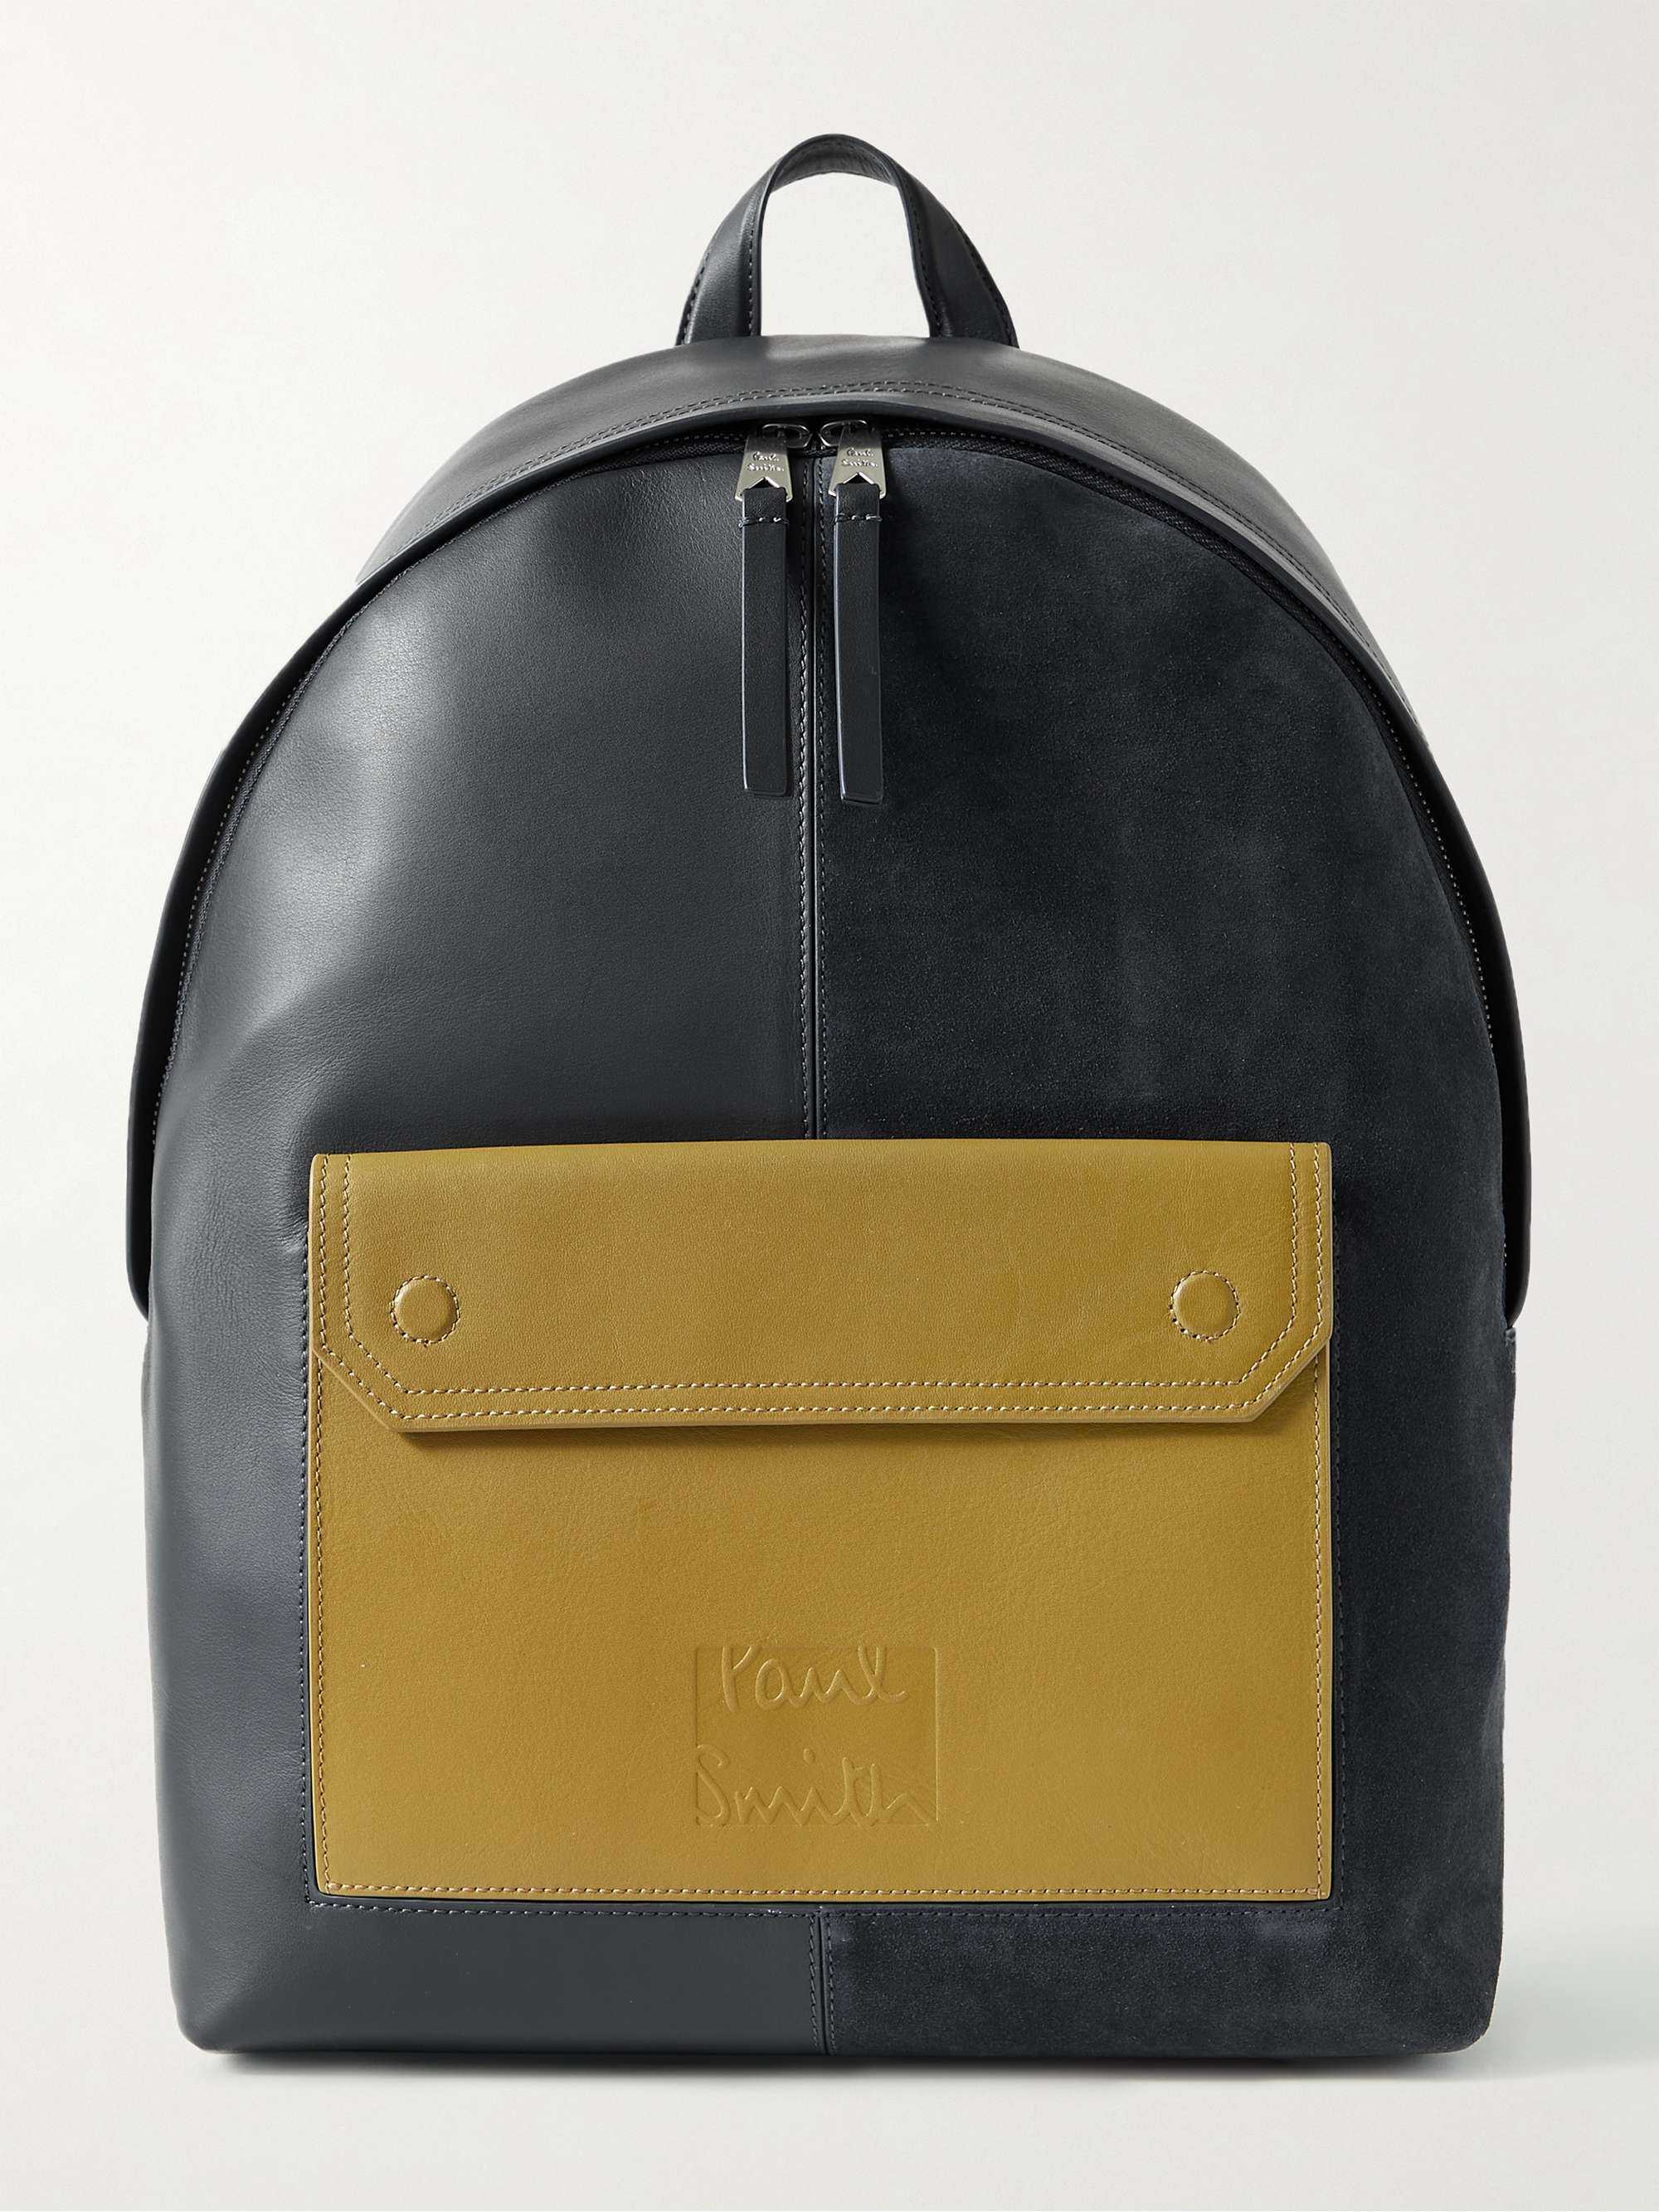 PAUL SMITH Two-Tone Leather and Suede Backpack | MR PORTER